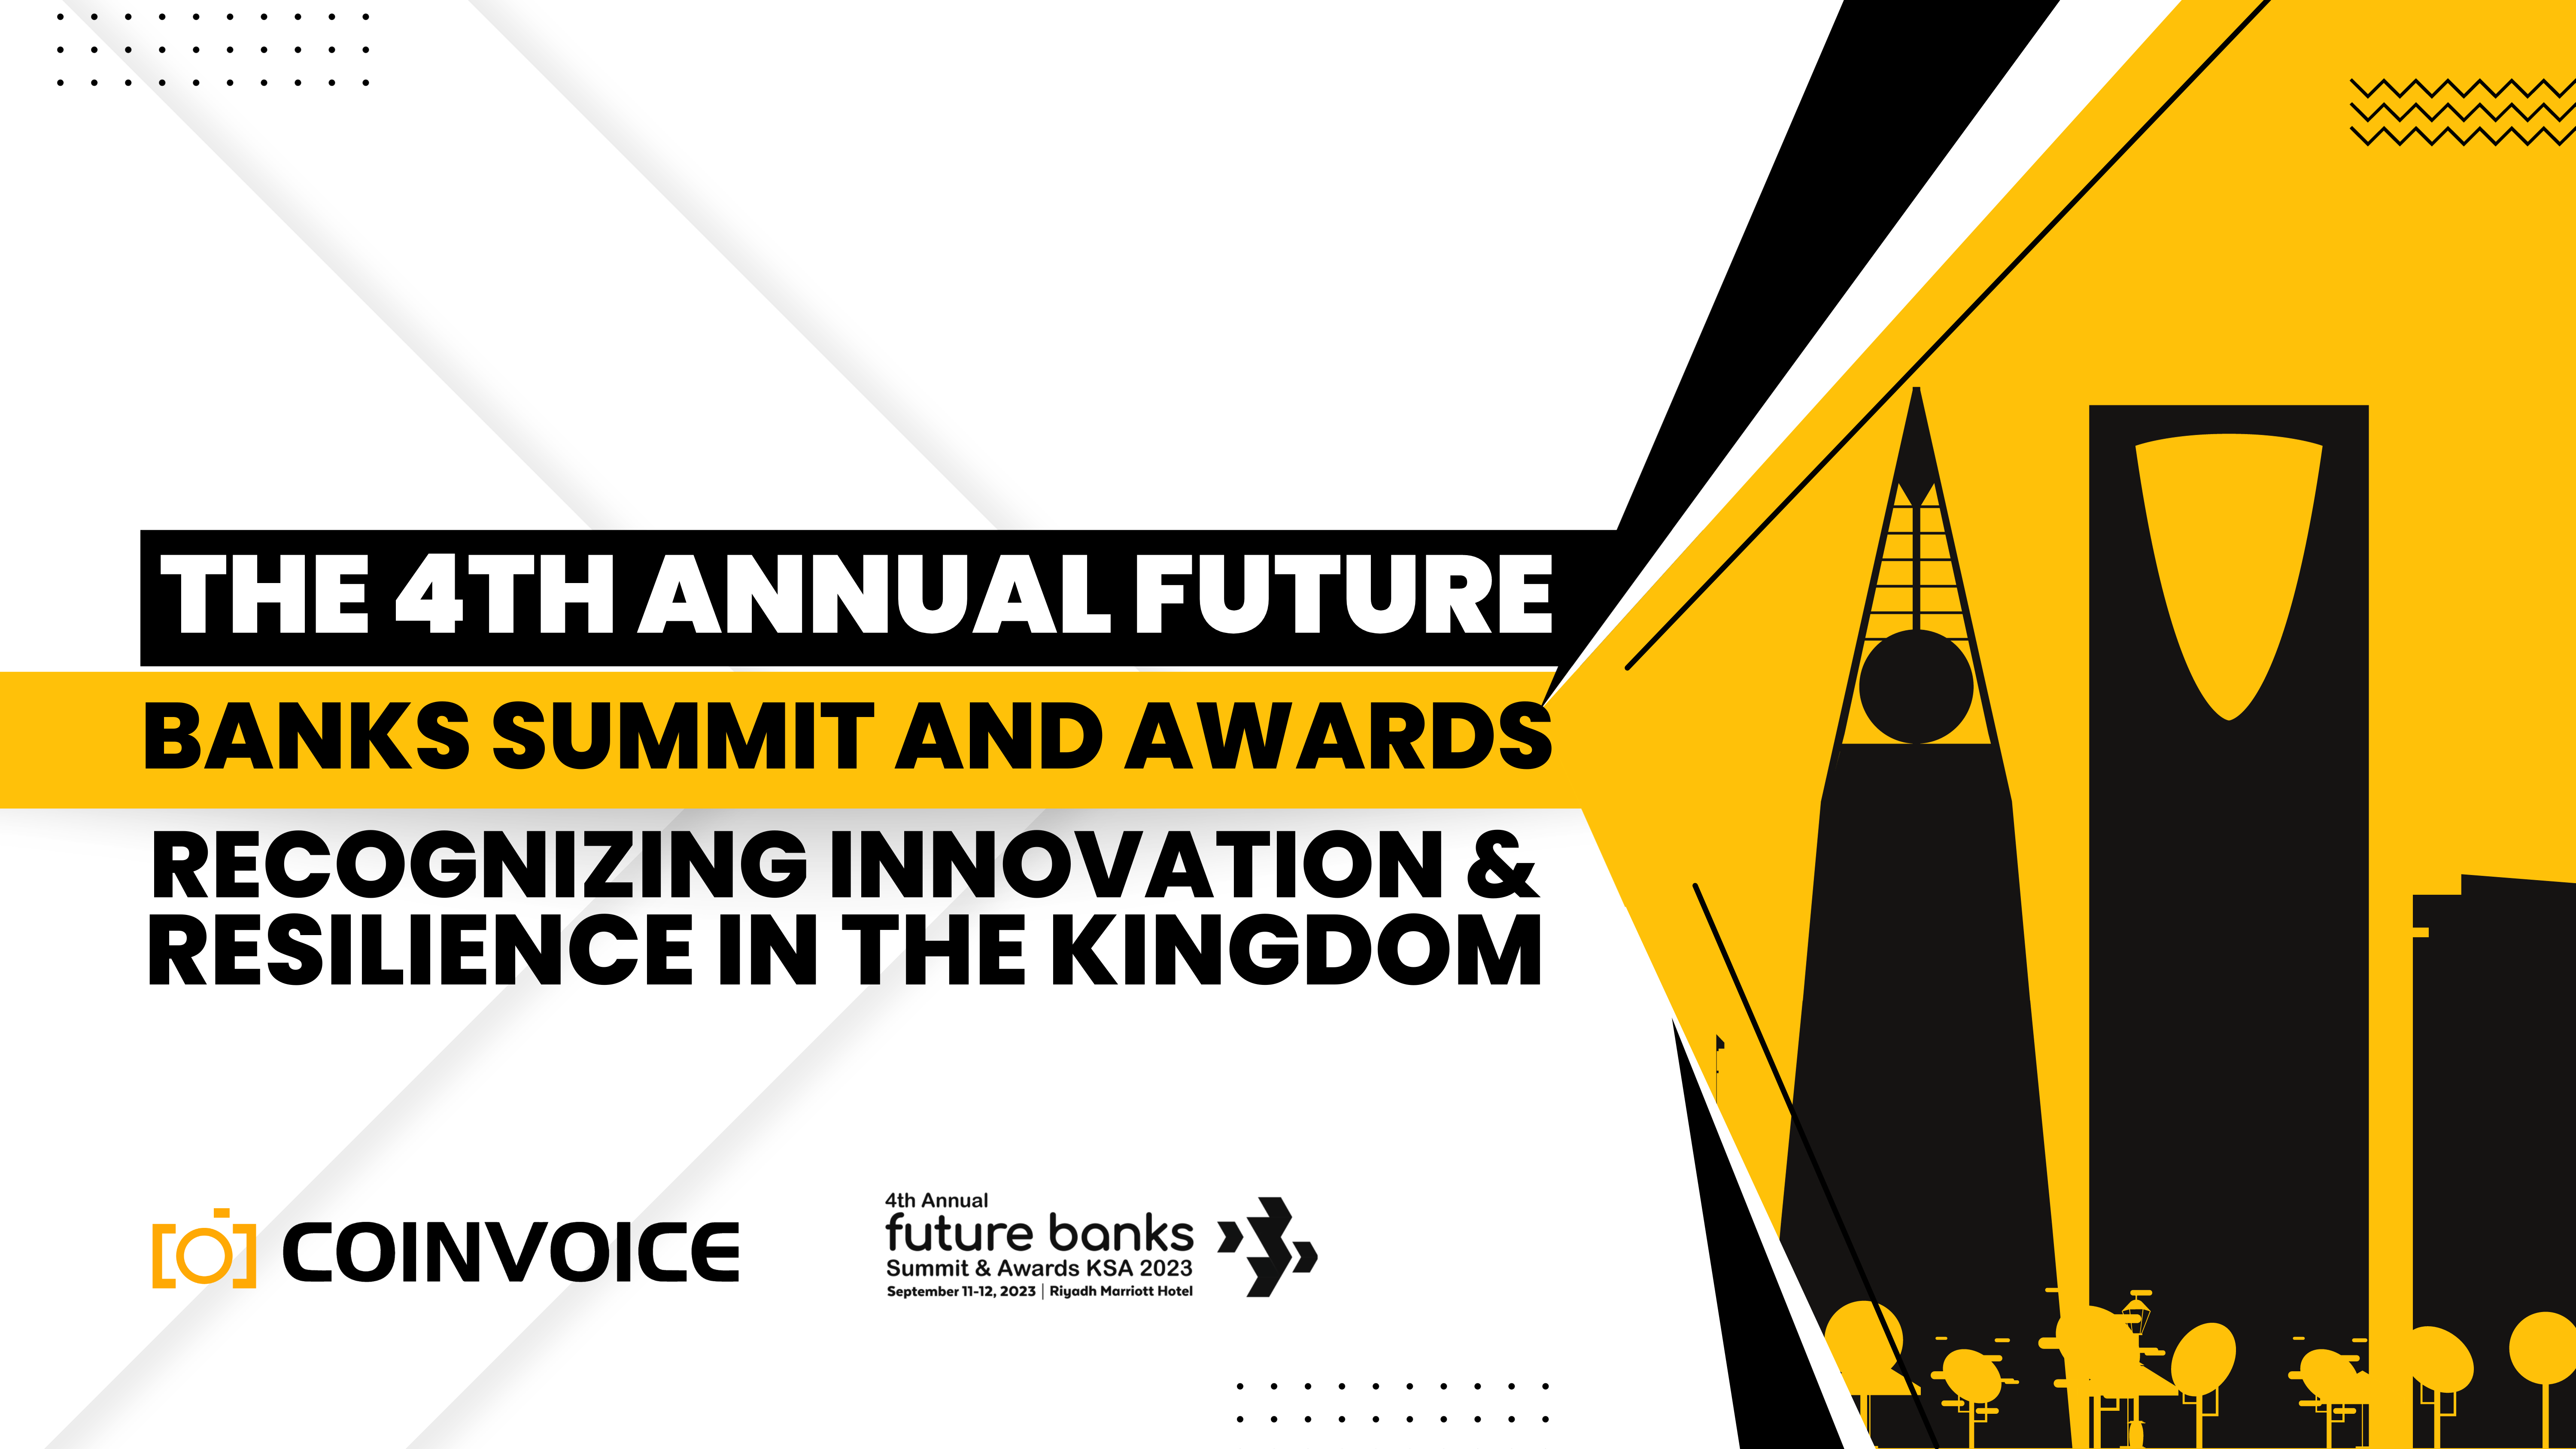 The 4th Annual Future Banks Summit & Awards: Recognizing Innovation & Resilience in The Kingdom